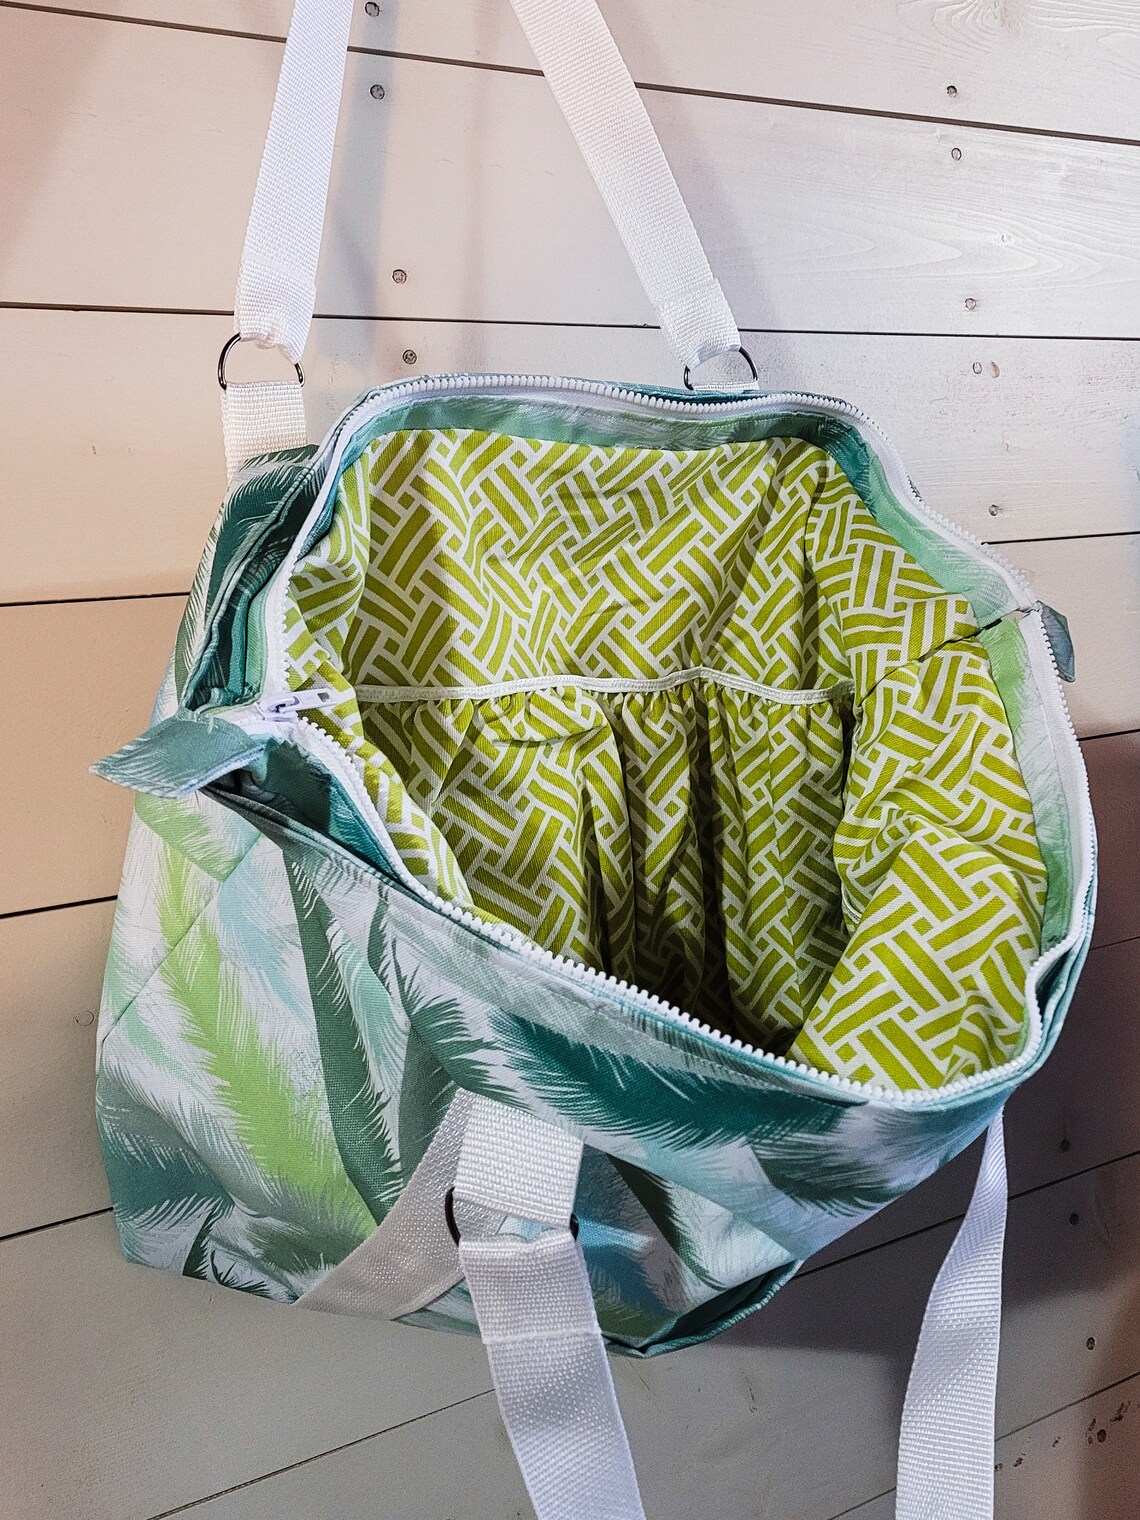 Handmade XL Tote Bag Lime Green and Tropical | Etsy